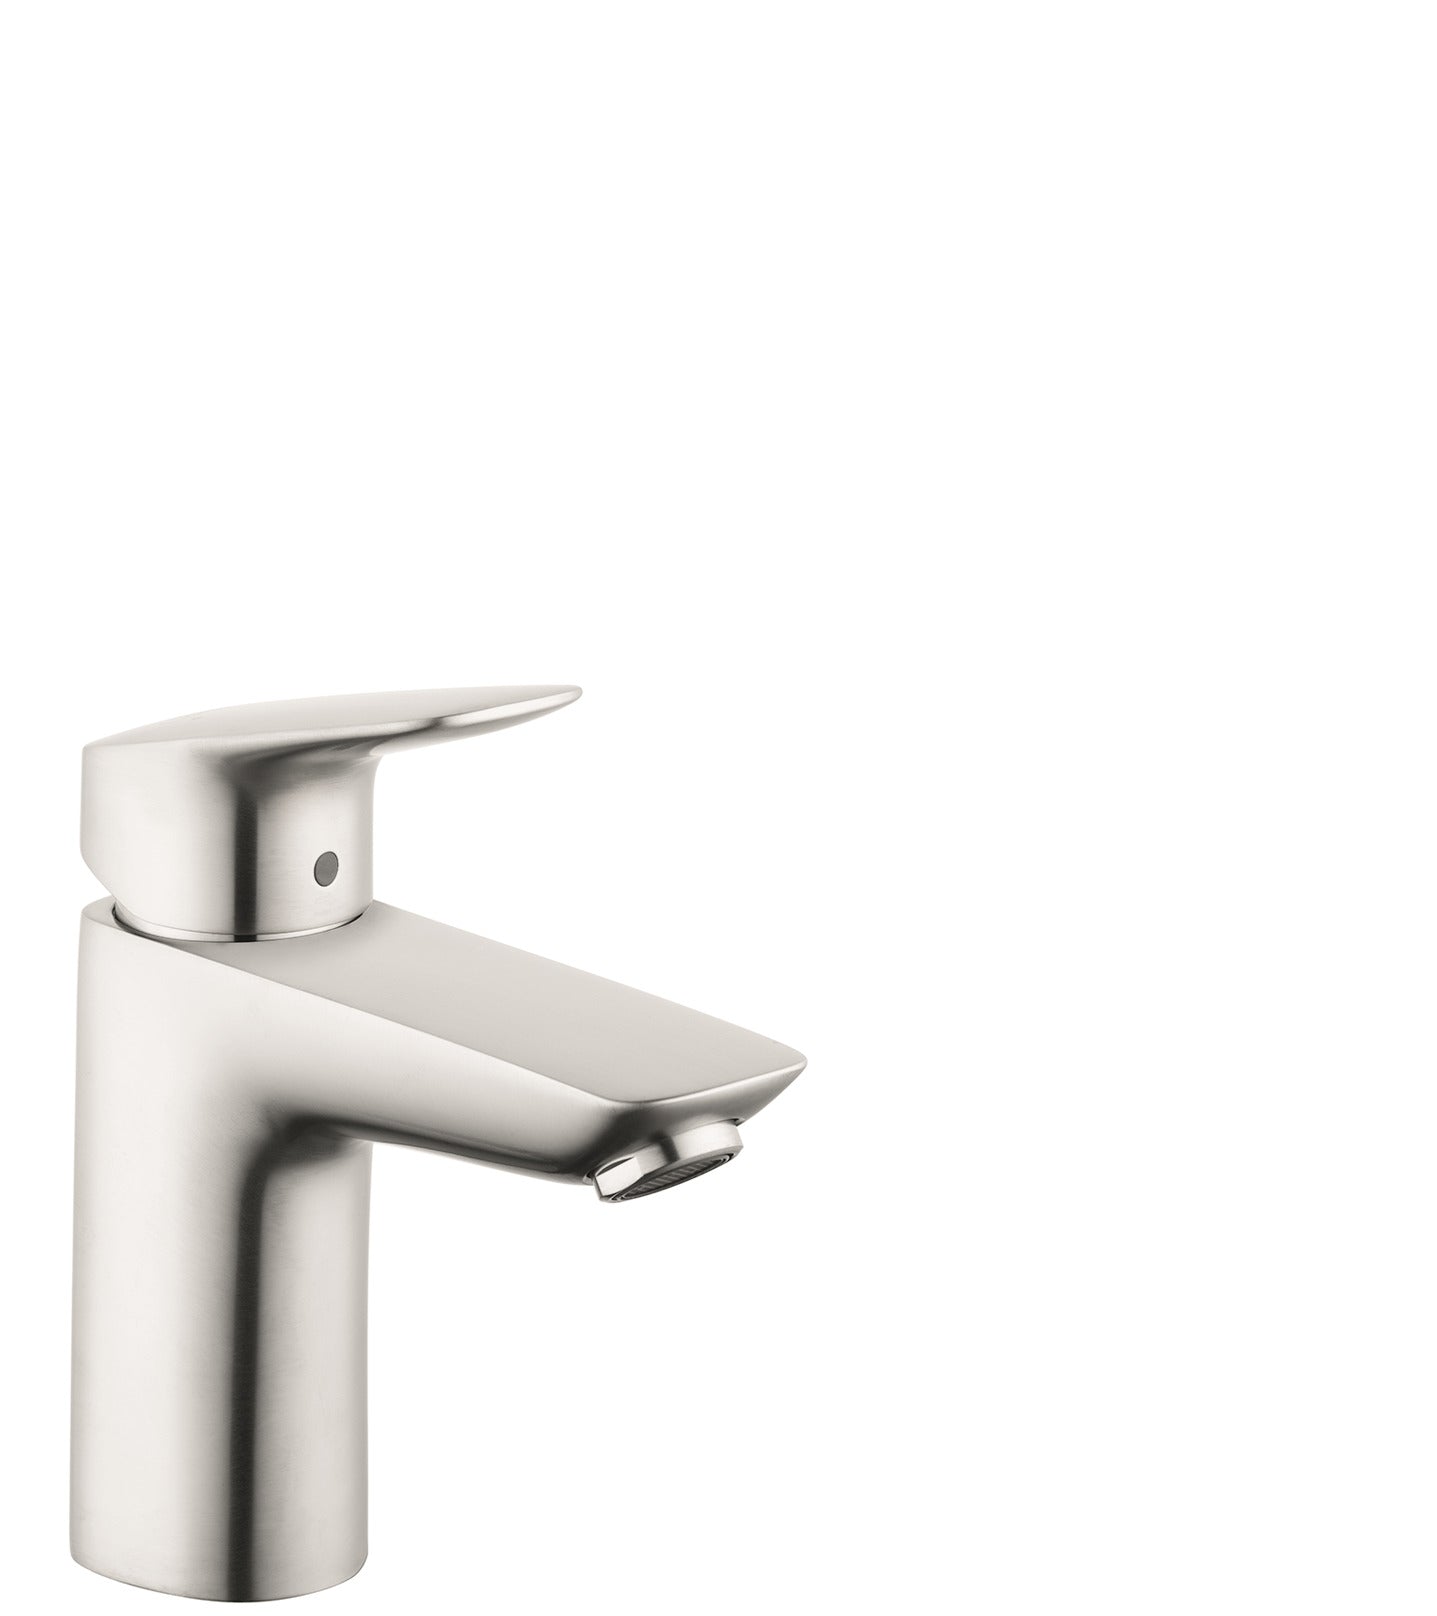 HANSGROHE 71100821 Brushed Nickel Logis Modern Single Hole Bathroom Faucet 1.2 GPM